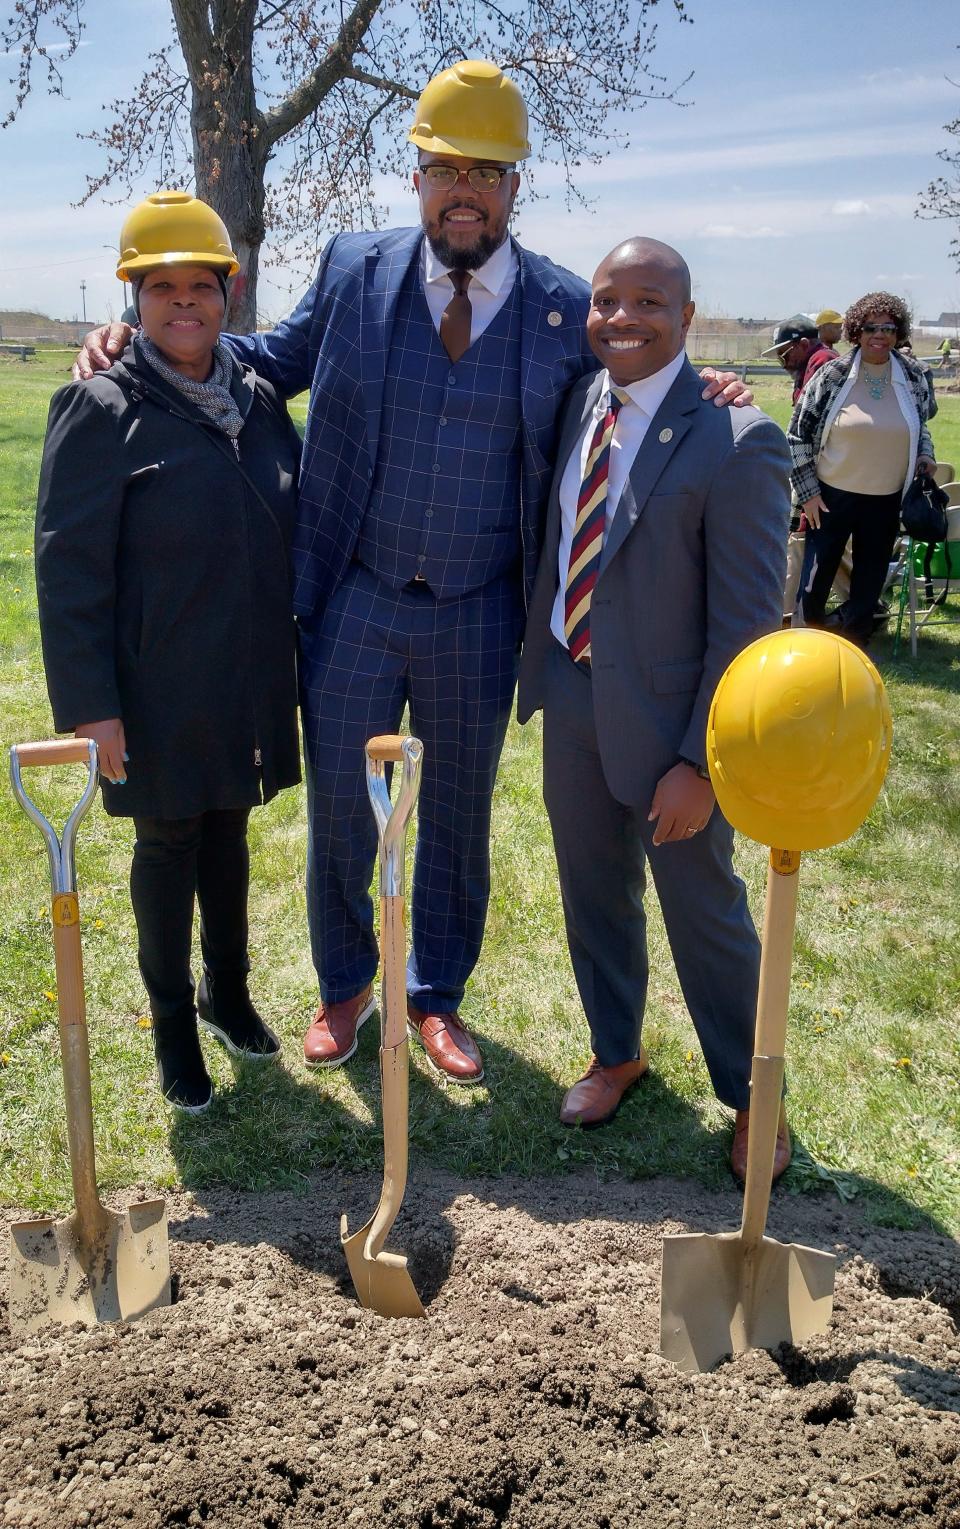 Yvonne McCaskill, of Century City Triangle Neighborhood Association (l) poses Wednesday with Ald. Khalif Rainey and Mayor Cavalier Johnson after a ceremonial groundbreaking for the redevelopment of Melvina Park on the city’s north side. The $2.3 million project will expand the nearly one-acre park to nearly 4 acres and include new amenities like new playgrounds, new trees, community gardens, and a covered performance stage.